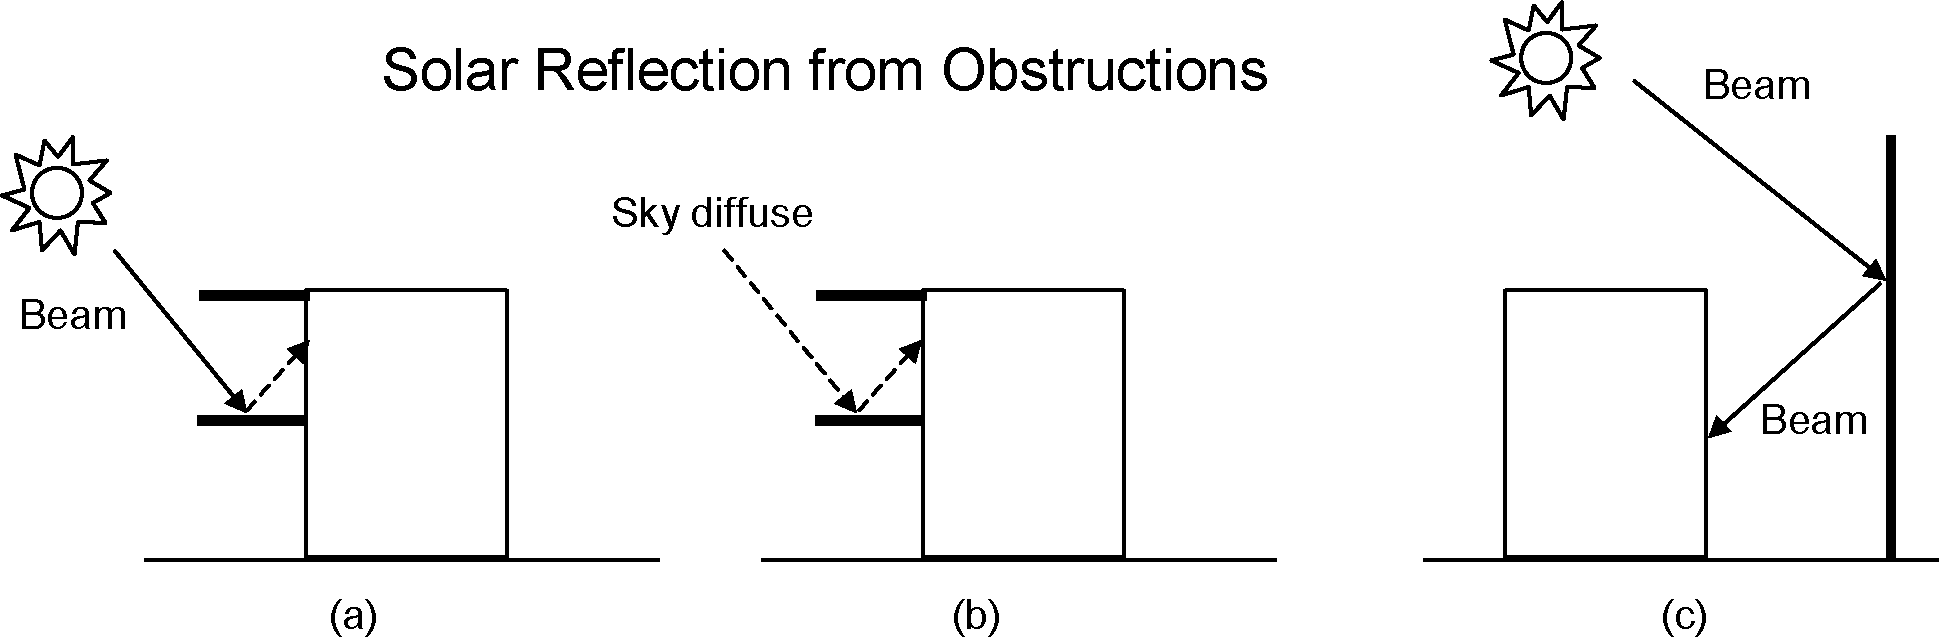 Examples of solar reflection from shadowing surfaces in the Shading series of input objects. Solid arrows are beam solar radiation; dashed arrows are diffuse solar radiation. (a) Diffuse reflection of beam solar radiation from the top of an overhang. (b) Diffuse reflection of sky solar radiation from the top of an overhang. (c) Beam-to-beam (specular) reflection from the façade of an adjacent highly-glazed building represented by a vertical shadowing surface. [fig:examples-of-solar-reflection-from-shadowing]